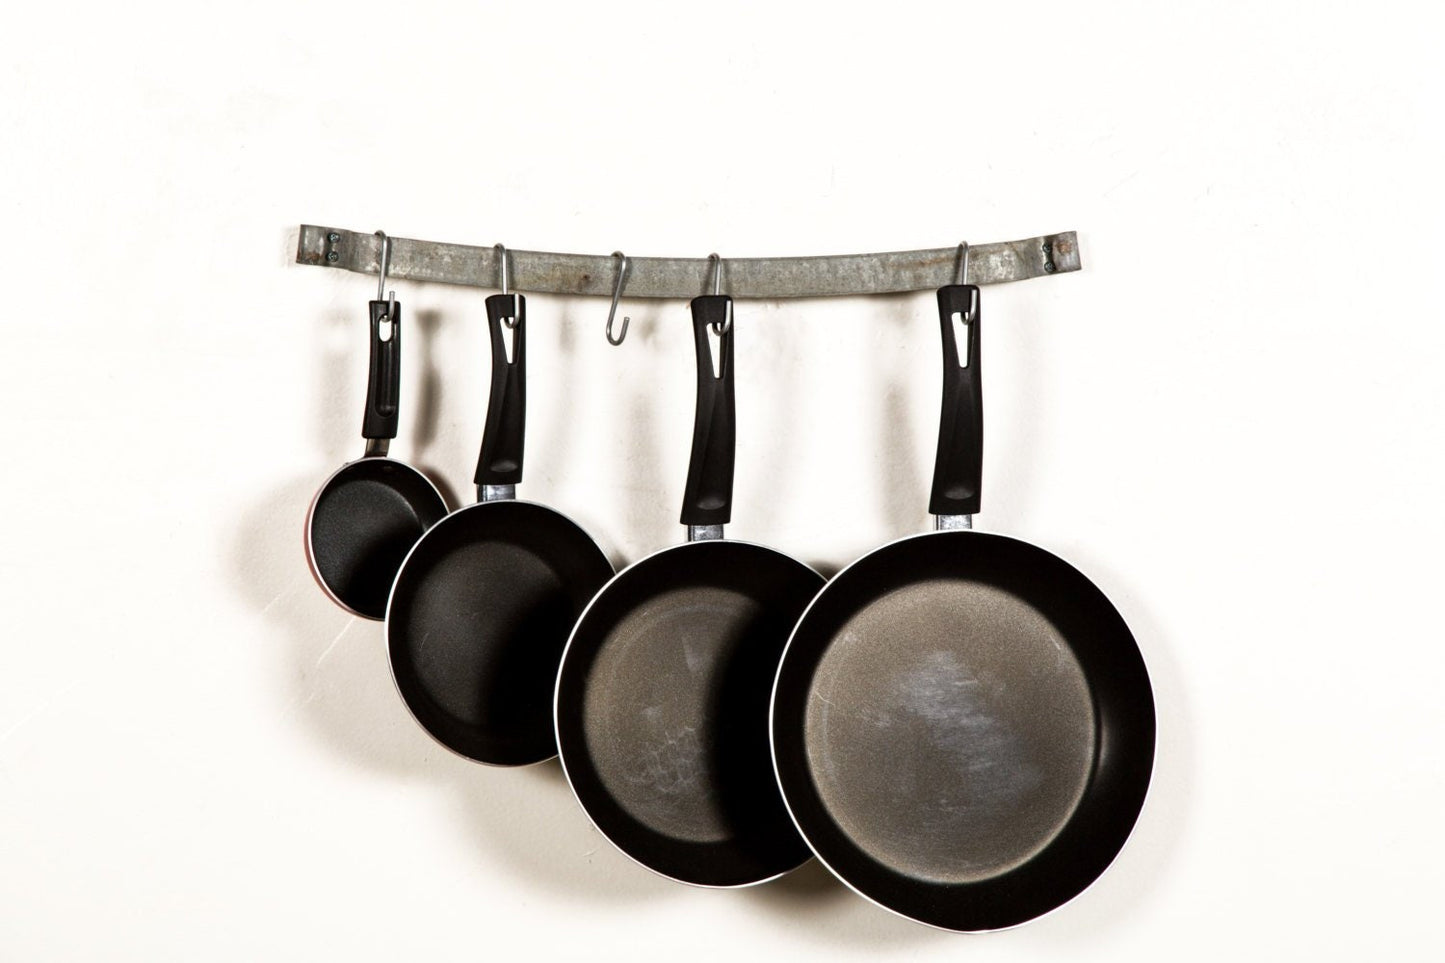 Wine Barrel Ring Pot Rack - Karuvi - Made from Retired California wine barrel rings 100% Recycled!